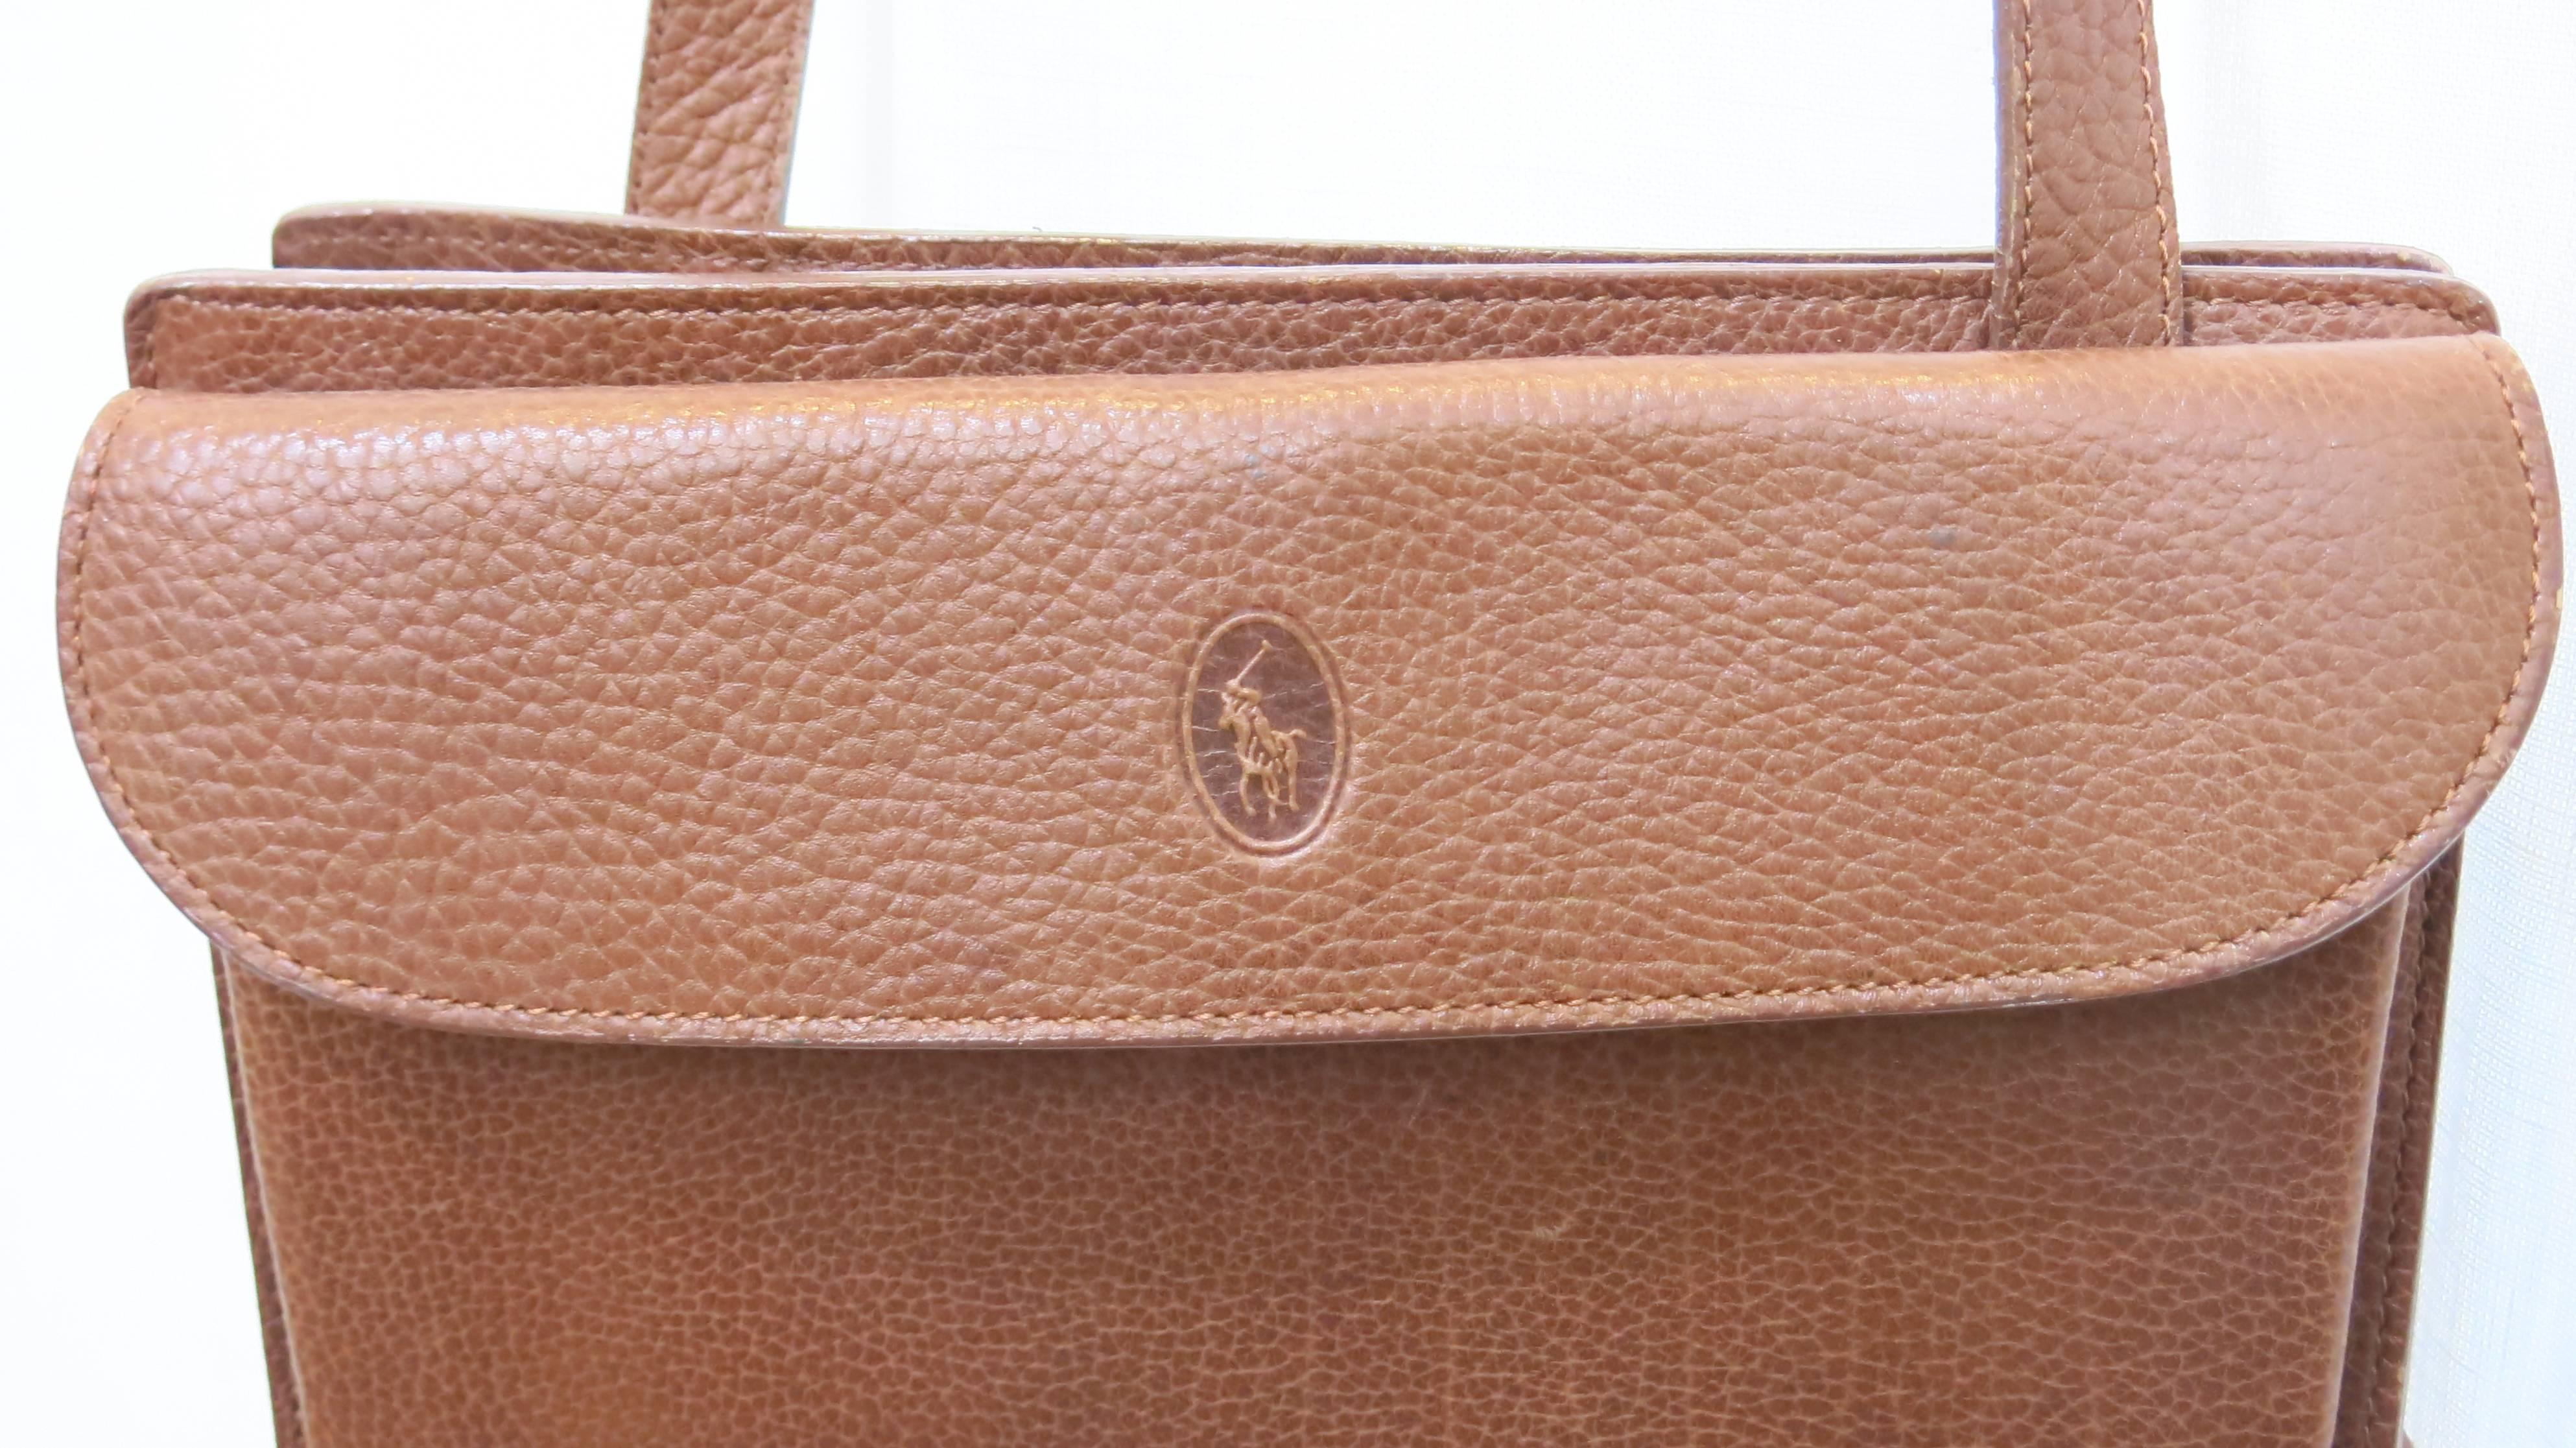 Brown Polo by Ralph Lauren Pebble Grain Leather Cross-Body Purse For Sale